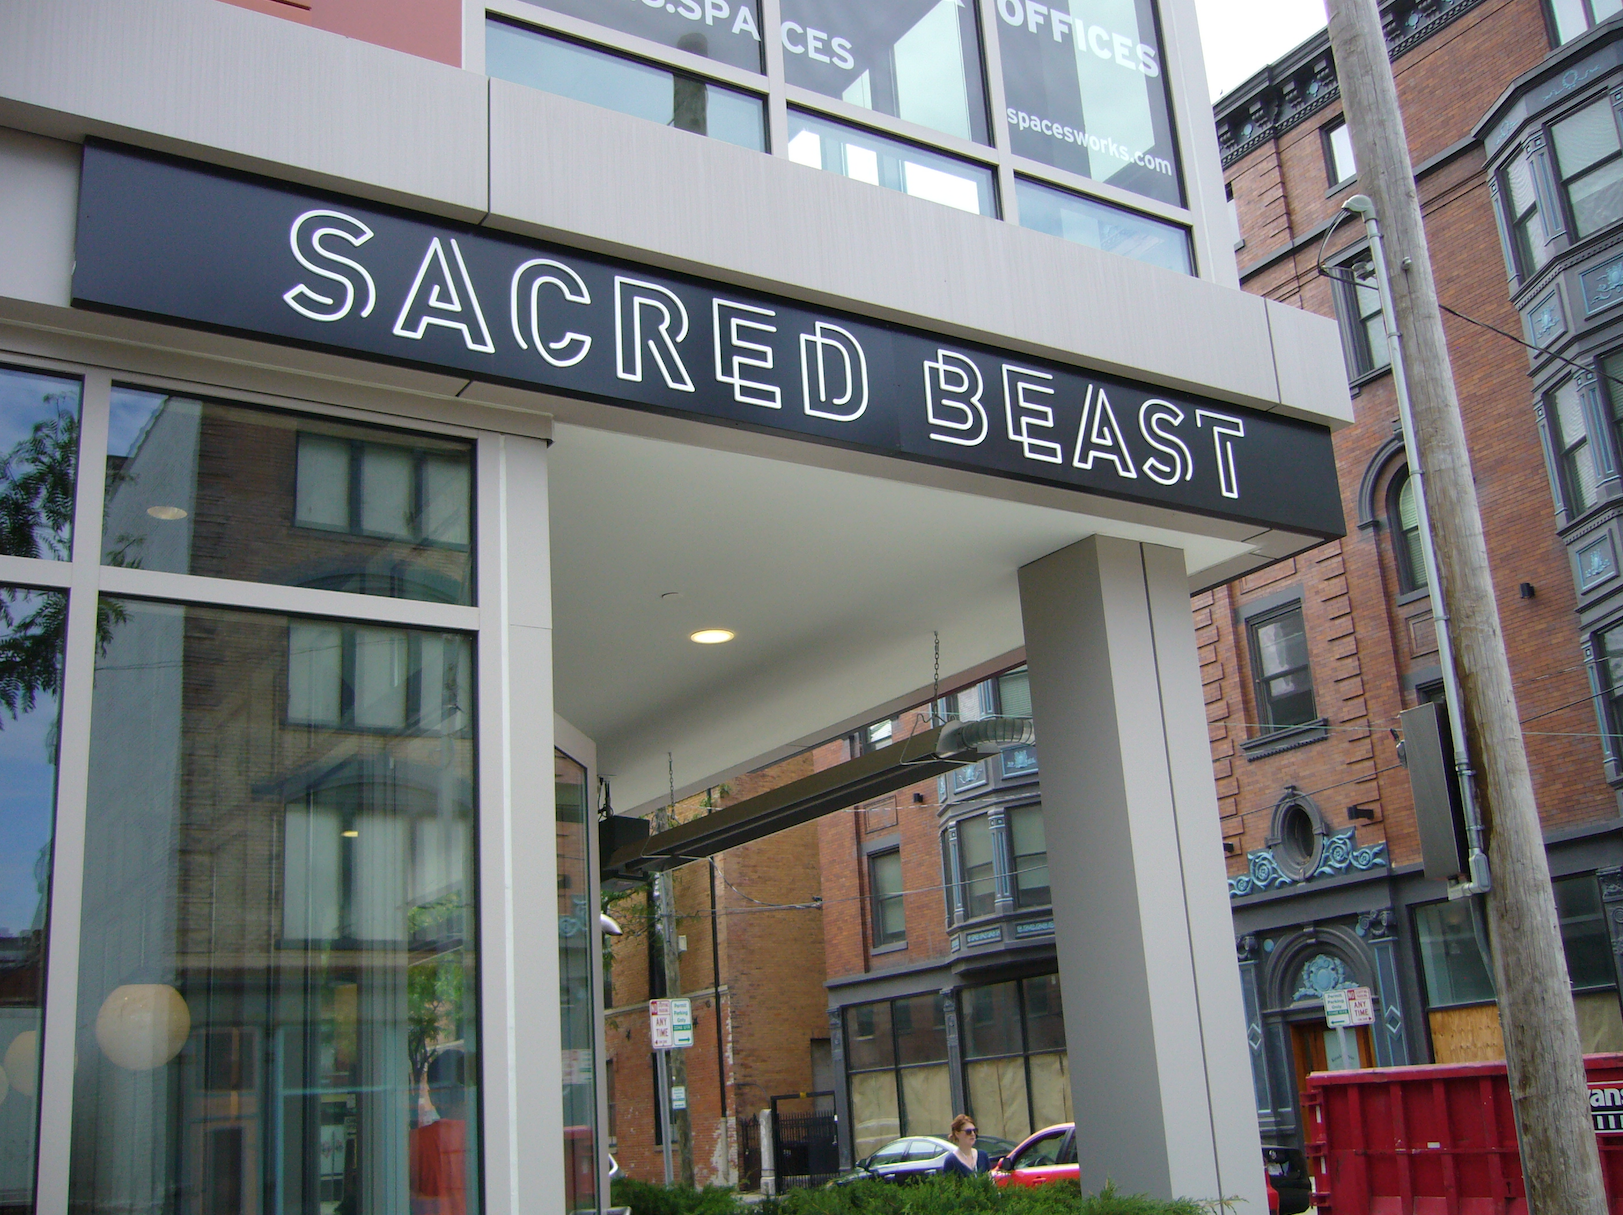 Sacred Beast offers new takes on old standards